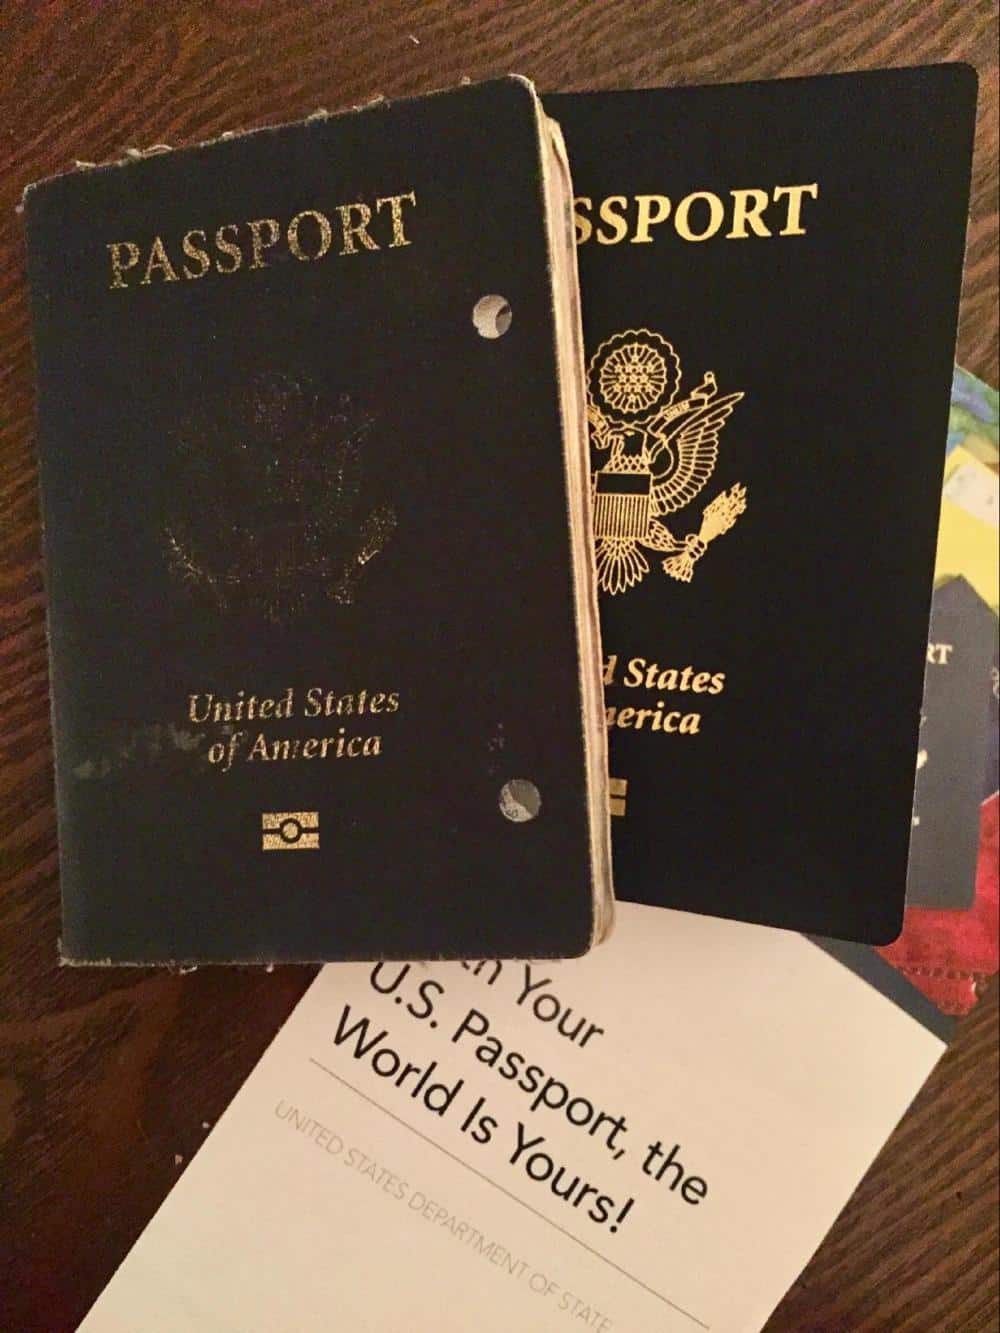 what would prevent you from getting a passport